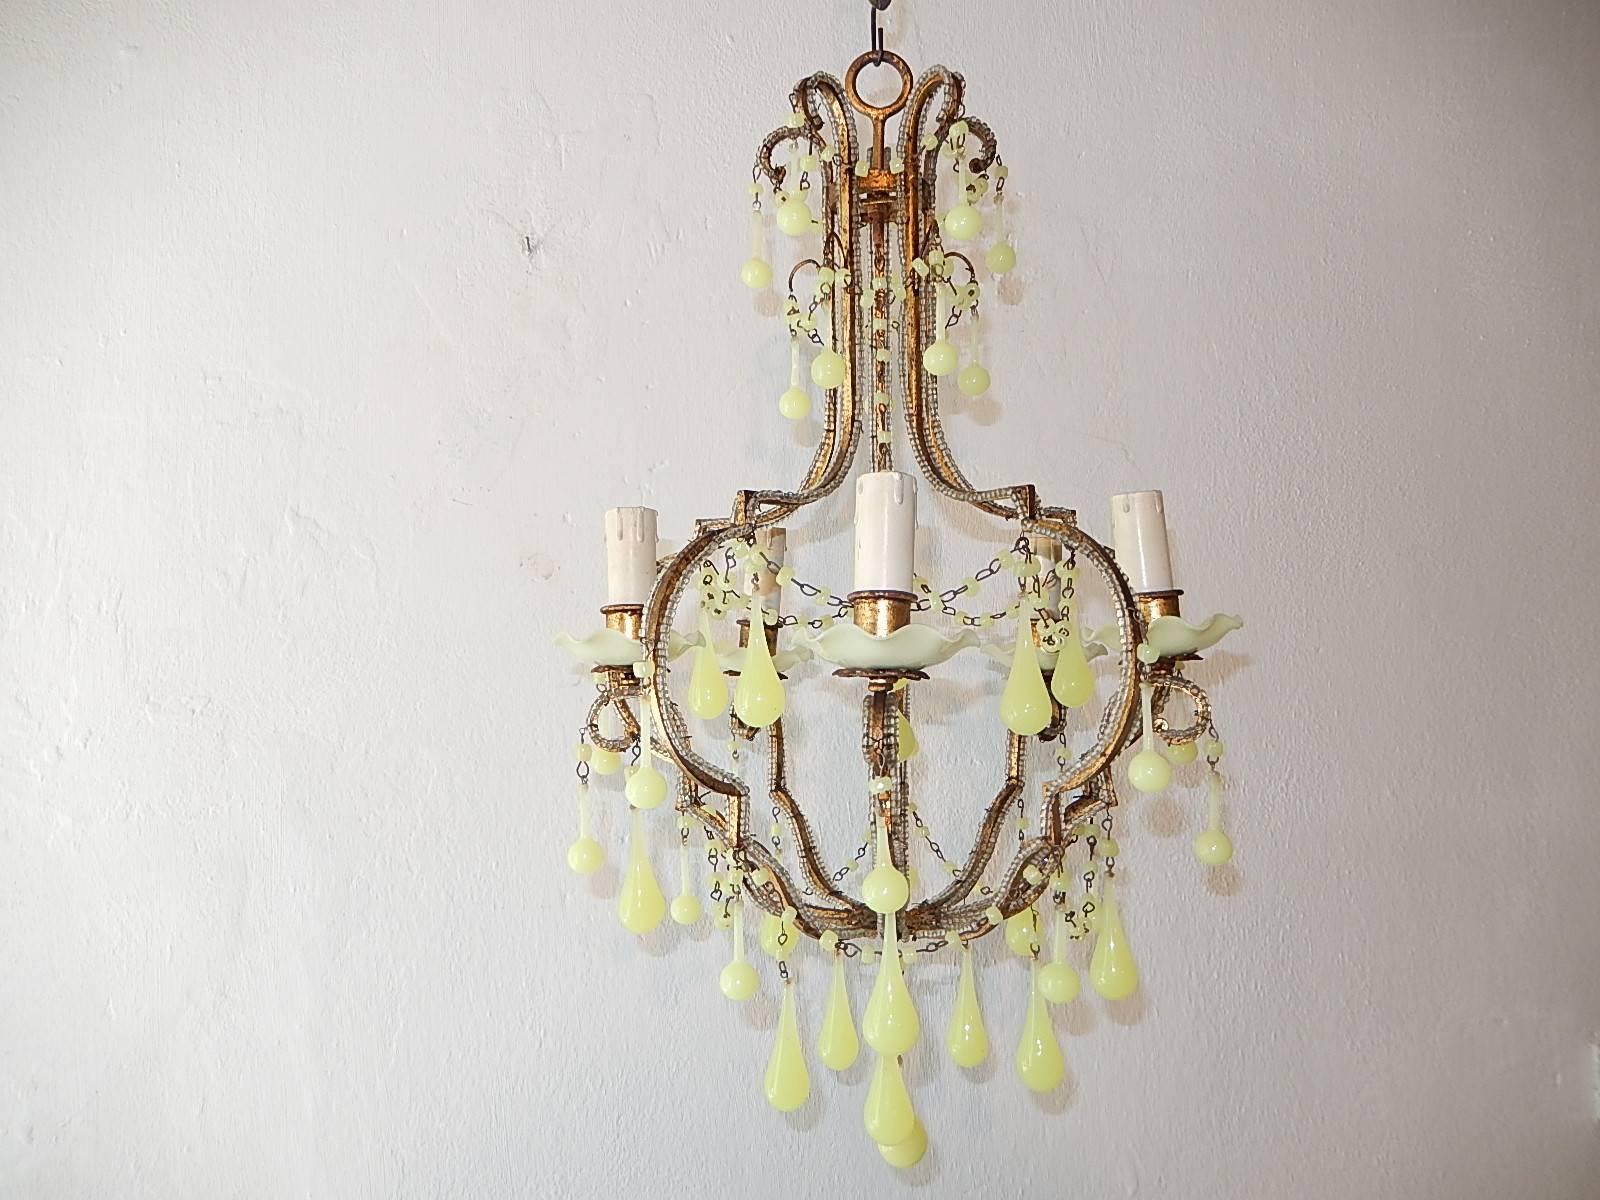 Murano Glass 1920 French Beaded Yellow Opaline Bobeches, Beads and Drops Chandelier